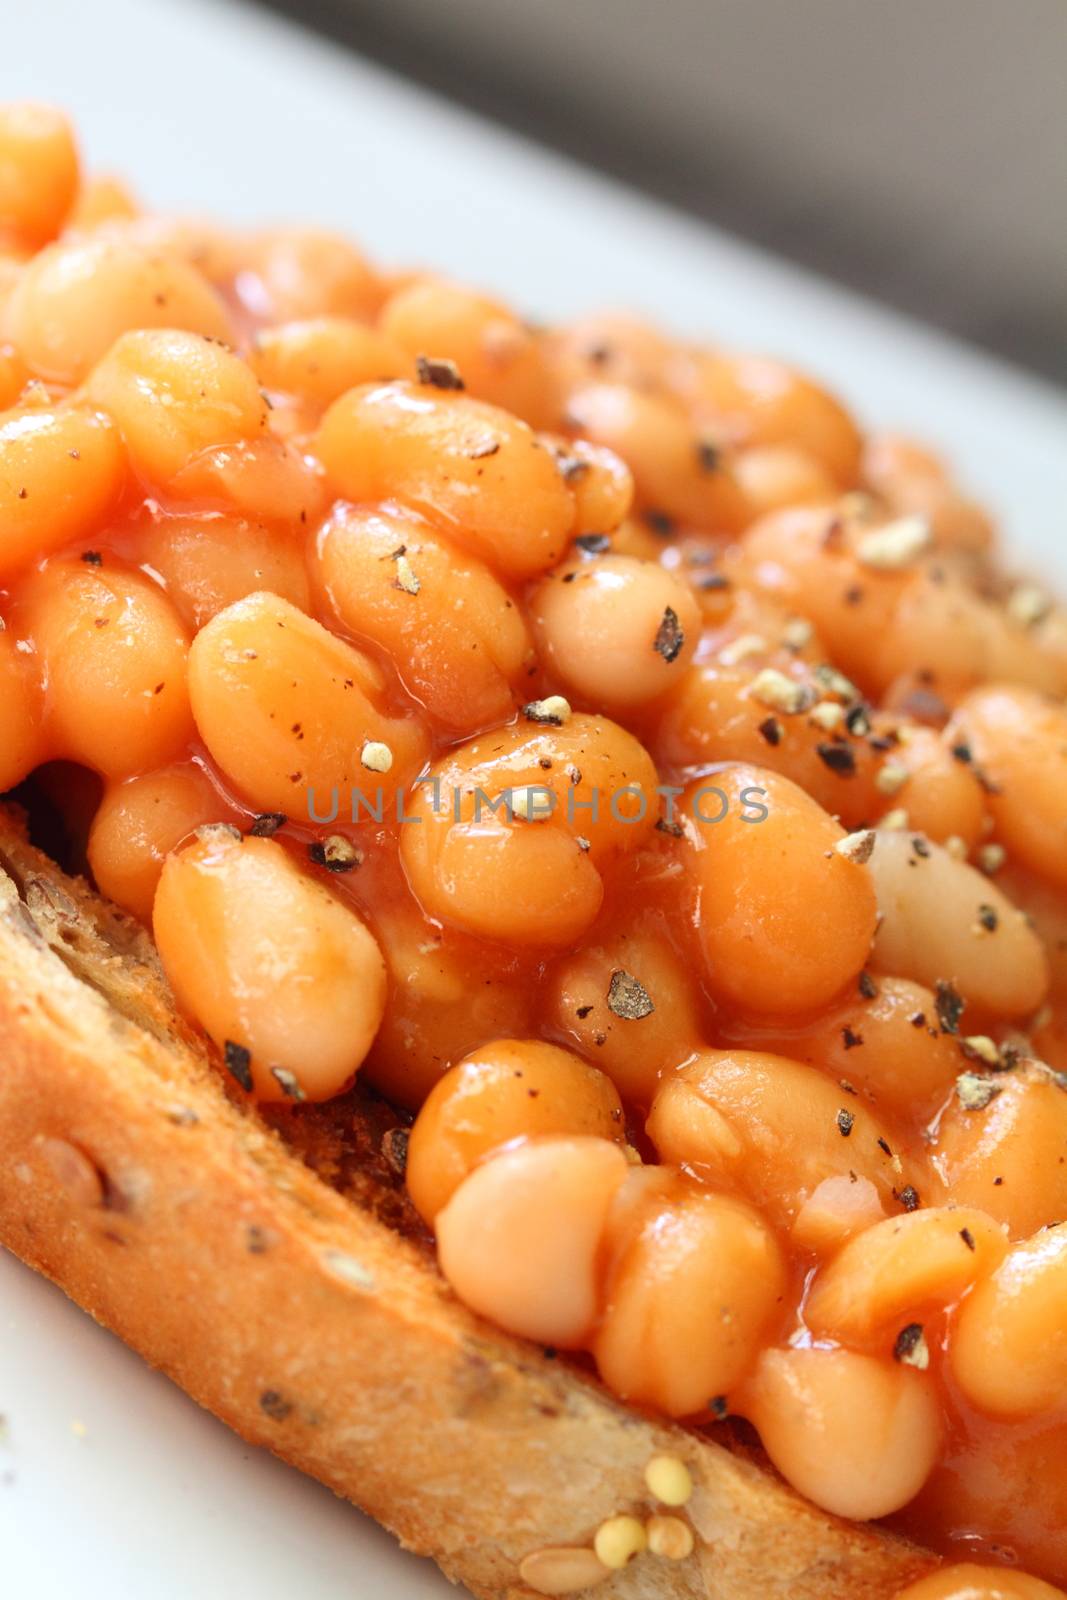 baked beans on toast with ground black pepper